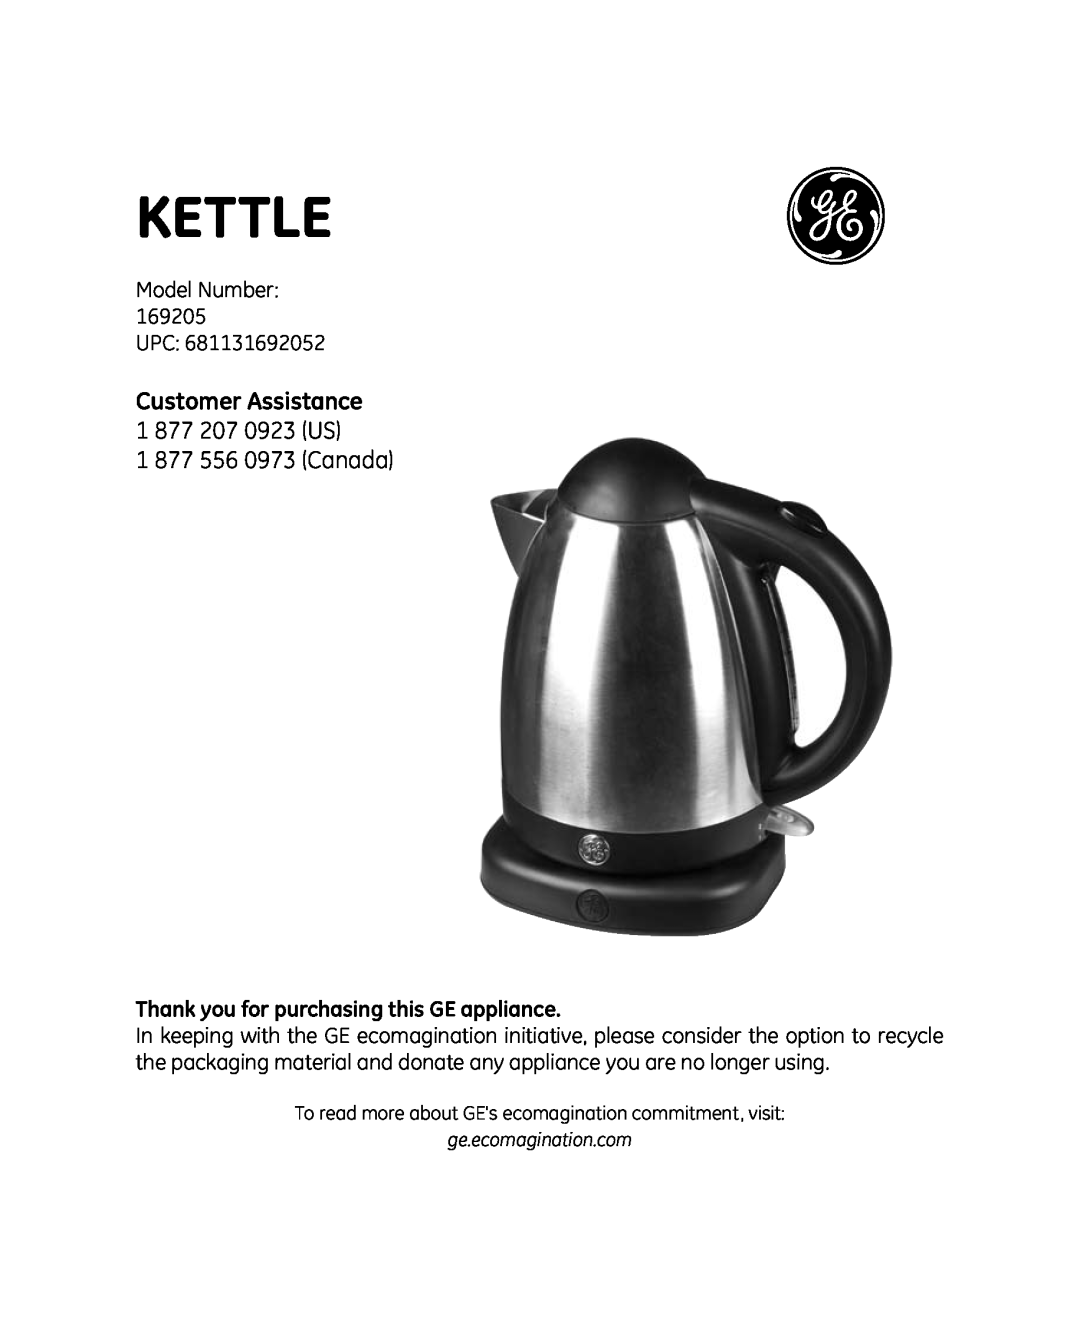 GE 681131692052 manual Customer Assistance 1 877 207 0923 US, Thank you for purchasing this GE appliance, Kettle 